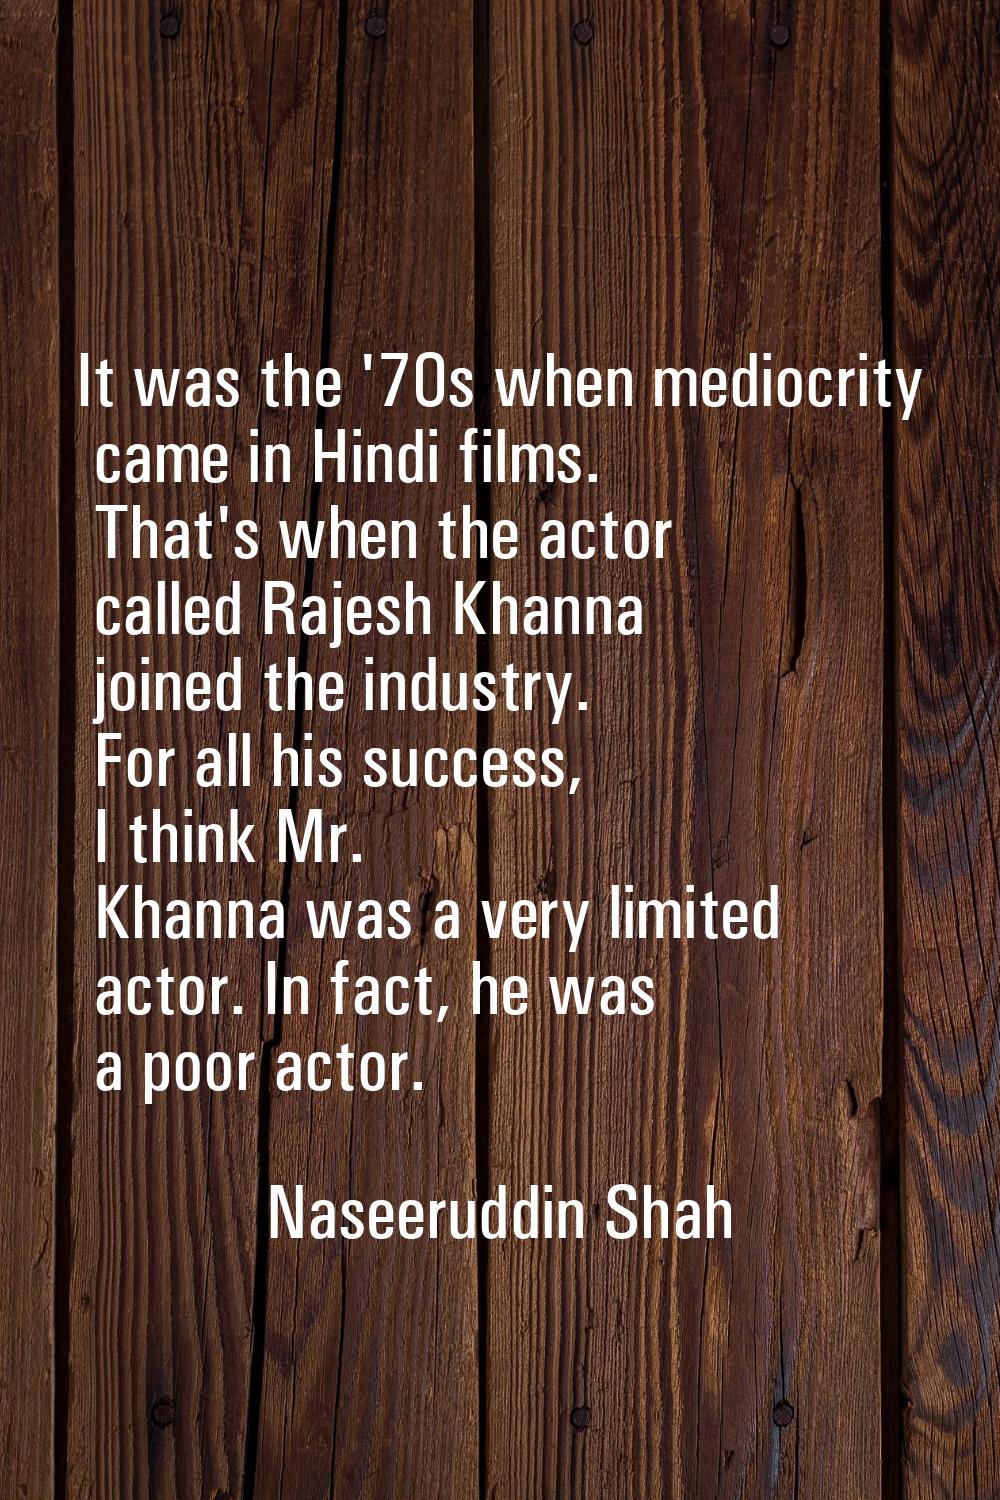 It was the '70s when mediocrity came in Hindi films. That's when the actor called Rajesh Khanna joi